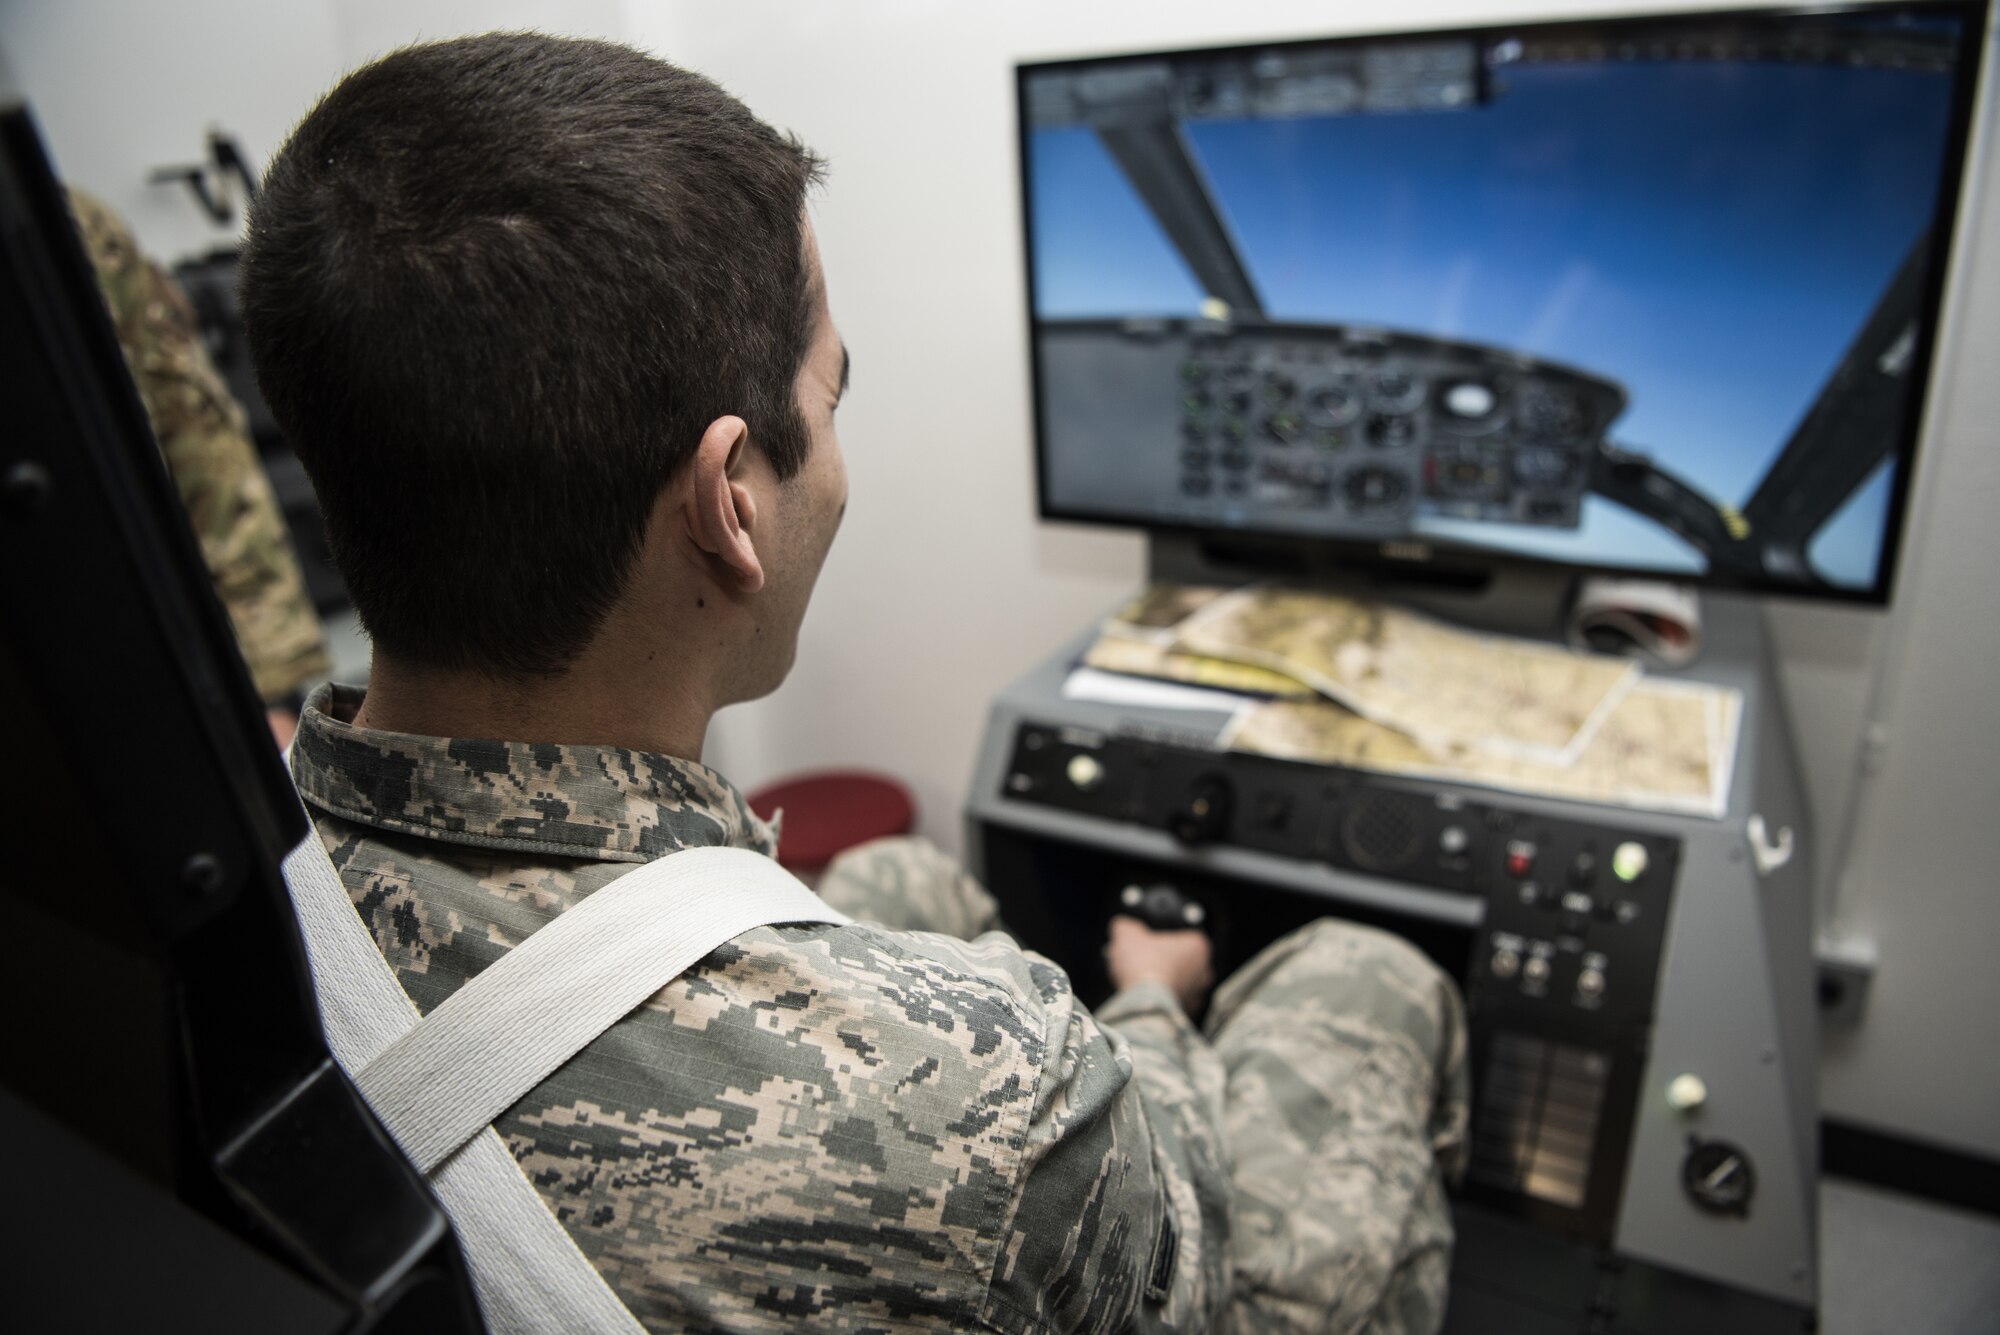 Senior Airman Andrew Kasmedo, 90th Munitions Squadron maintenance team member, flies a helicopter simulation while visiting 90th Medicals Group Aerospace and Operational Physiology during the Mission  Immersion Day at F.E. Warren Air Force Base, Wyo., Feb. 27, 2018. The Airmen were able to get an inside look at the dangers of hypoxia and how the Aerospace and Operational Physiology team works to educate the pilots on the warning signs and how to react to the situation. The Mission Immersion Day was put together to allow Airmen the opportunity to exercise cross communication between the different career fields on base.  (U.S. Air Force photo by Airman 1st Class Abbigayle Wagner)